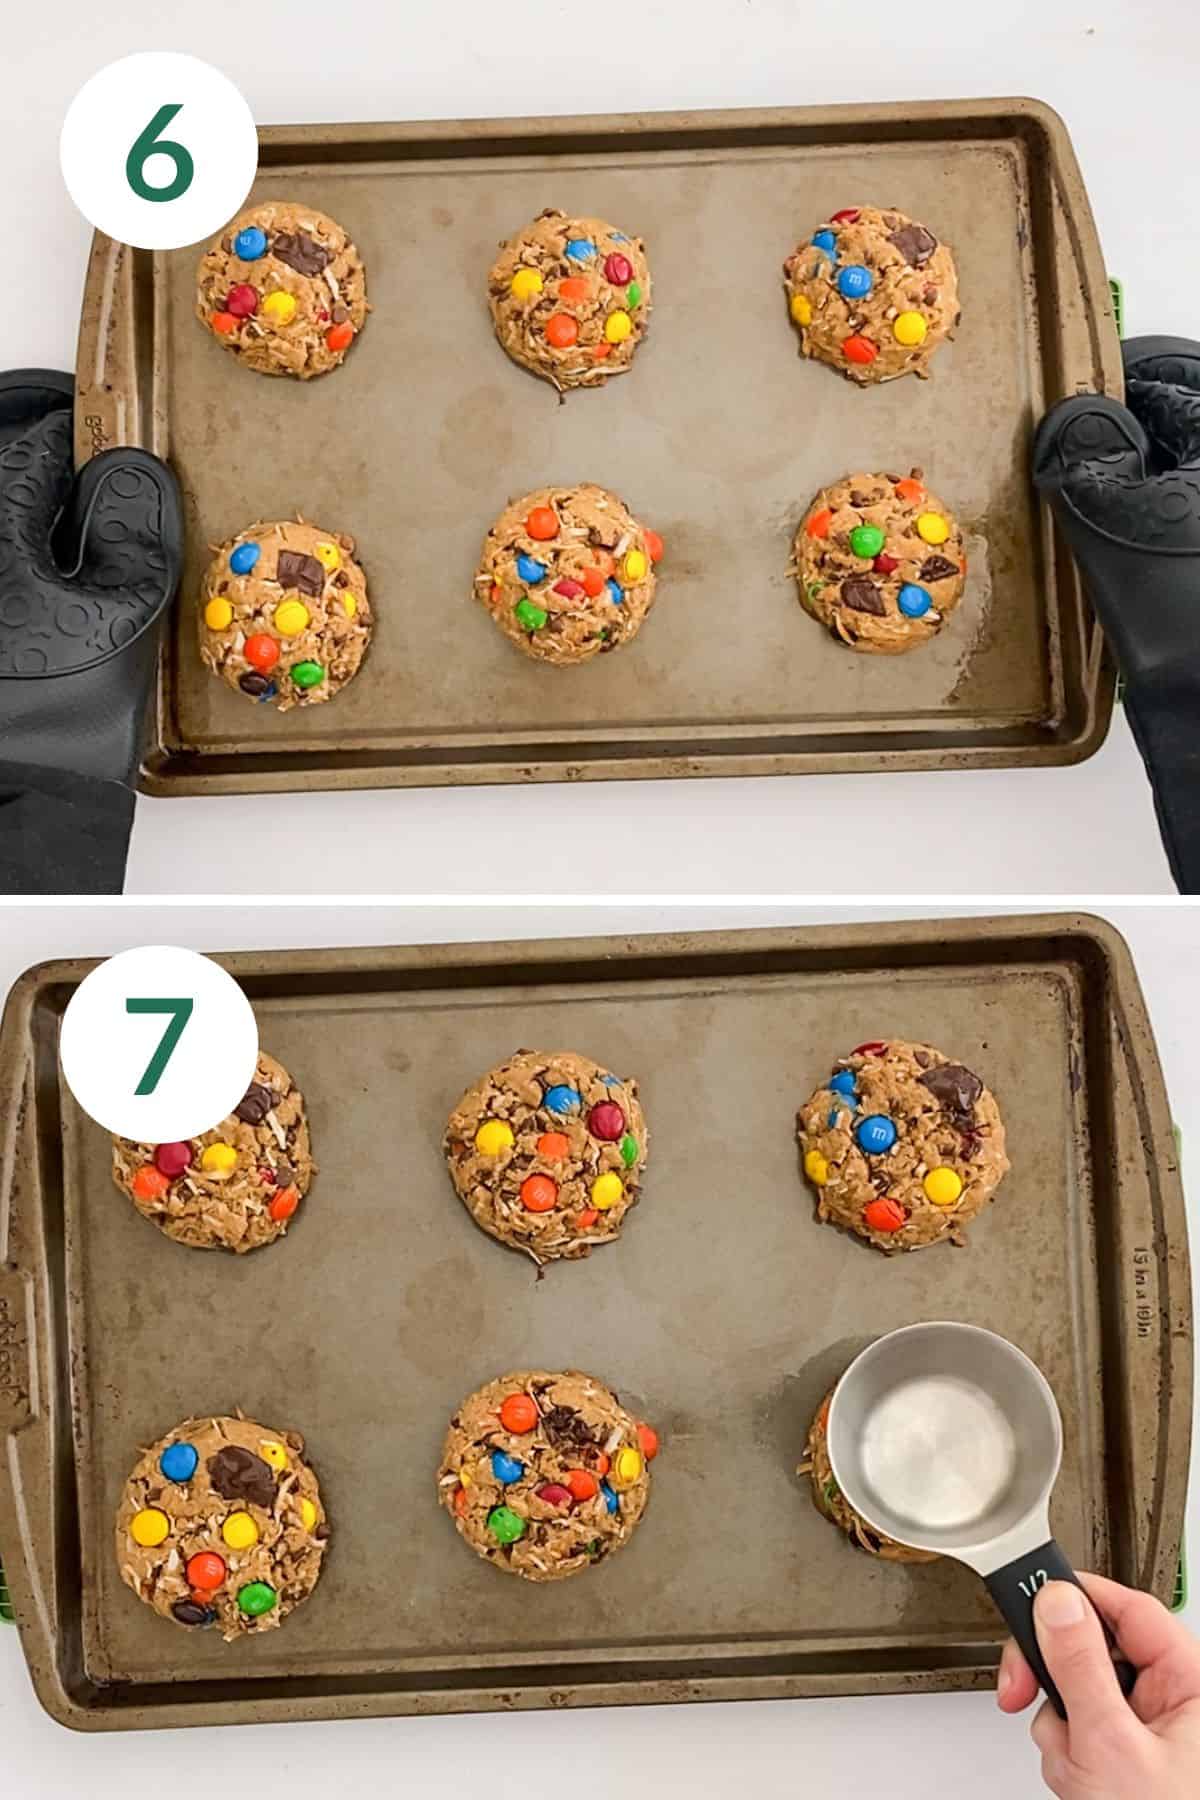 A baking sheet of freshly baked cookies and a hand pressing a cookie down with the back of a measuring cup.